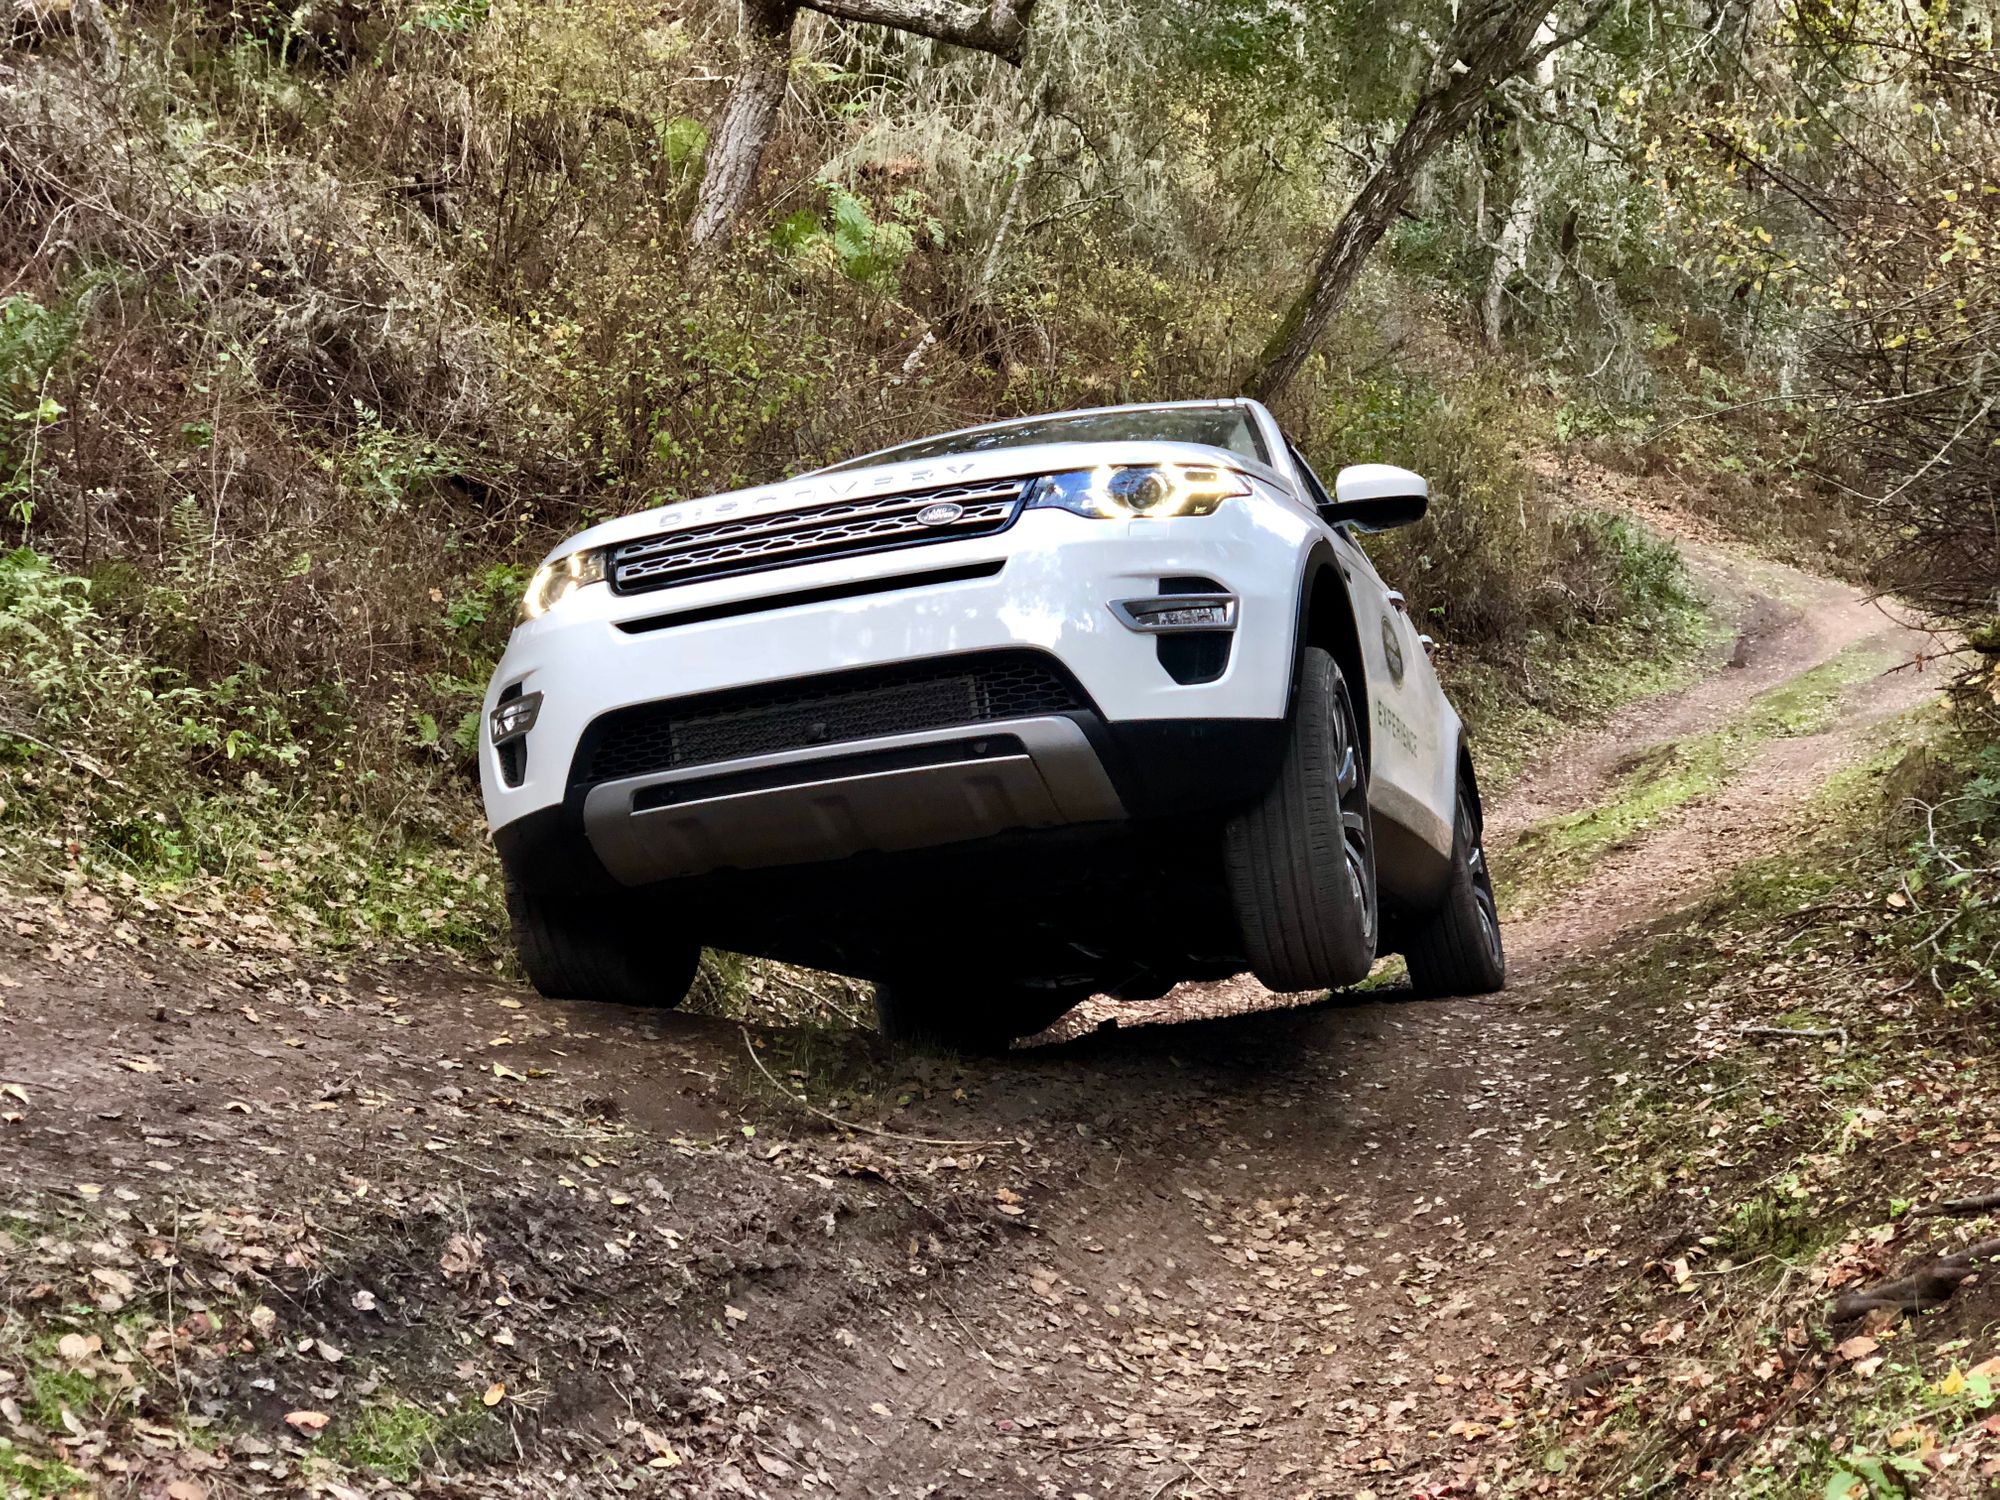 4WD training at the Carmel Land Rover Experience Nov 2017